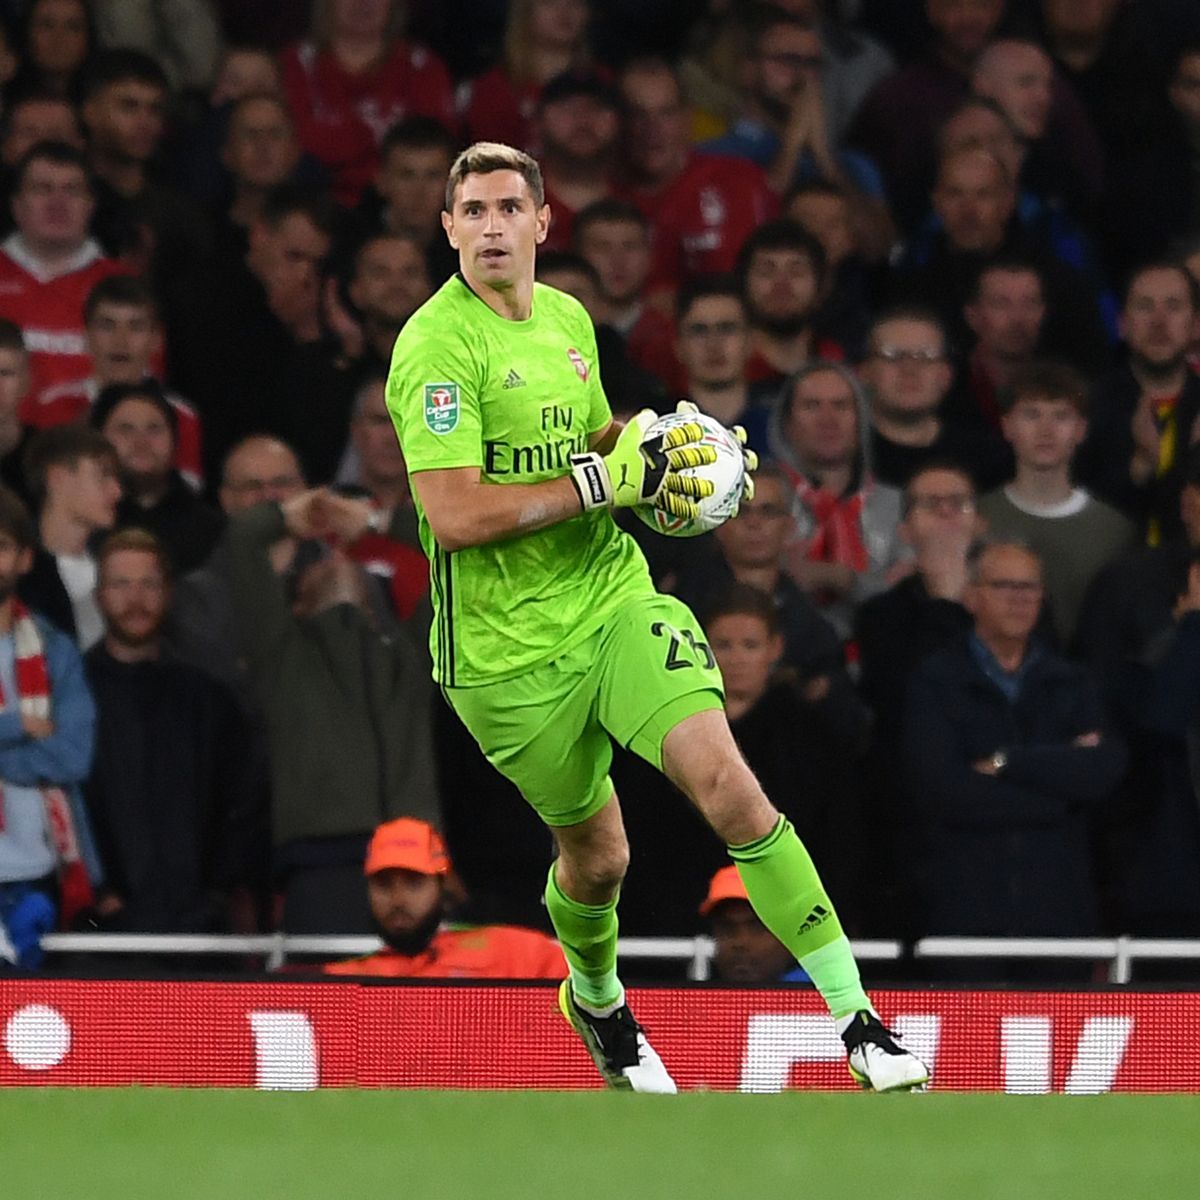 Emiliano Martinez, his Arsenal future and what his fine form means for Unai Emery